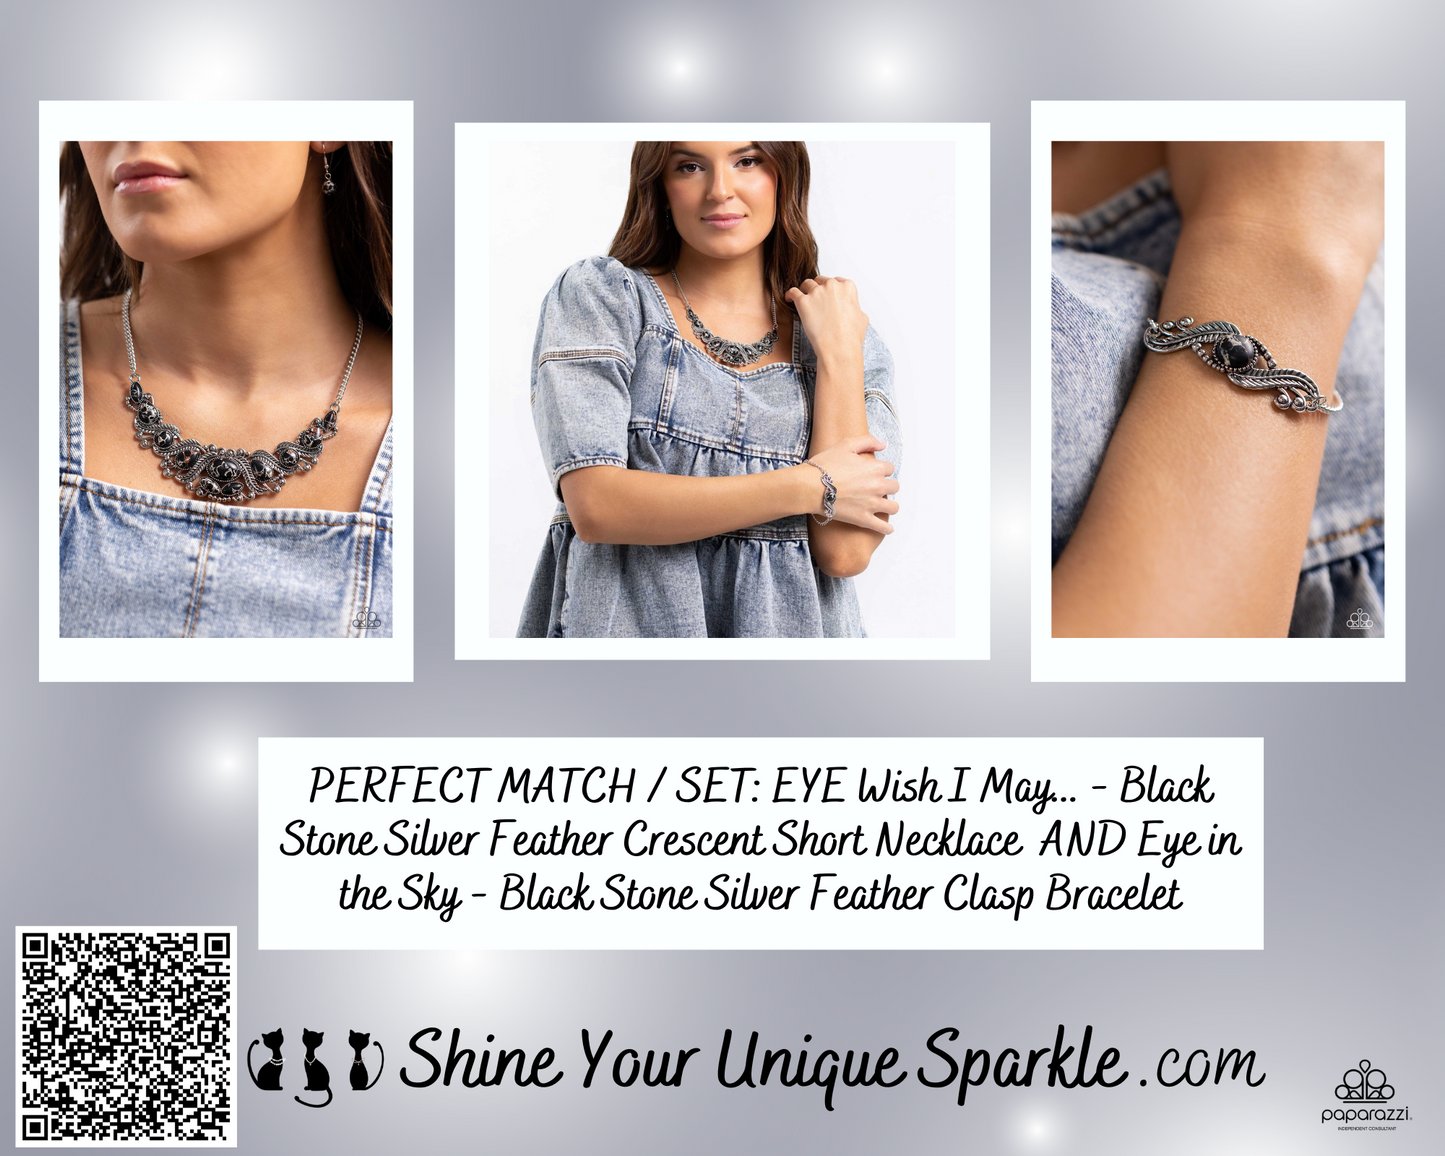 PERFECT MATCH / SET: EYE Wish I May... - Black Stone Silver Feather Crescent Short Necklace AND Eye in the Sky - Black Stone Silver Feather Clasp Bracelet